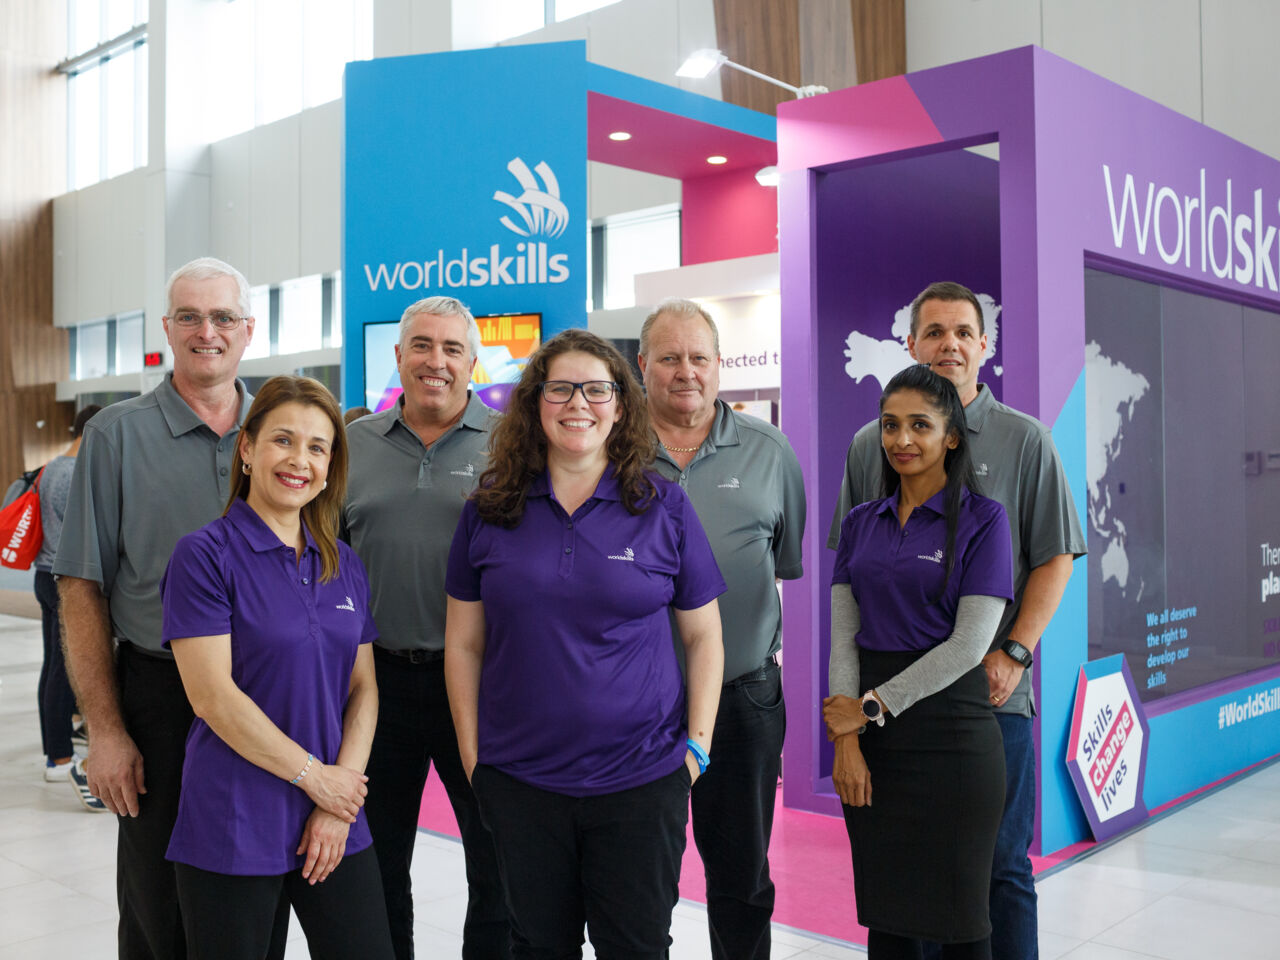 Share your passion for skills as part of the WorldSkills Experts Faculty Representative Team